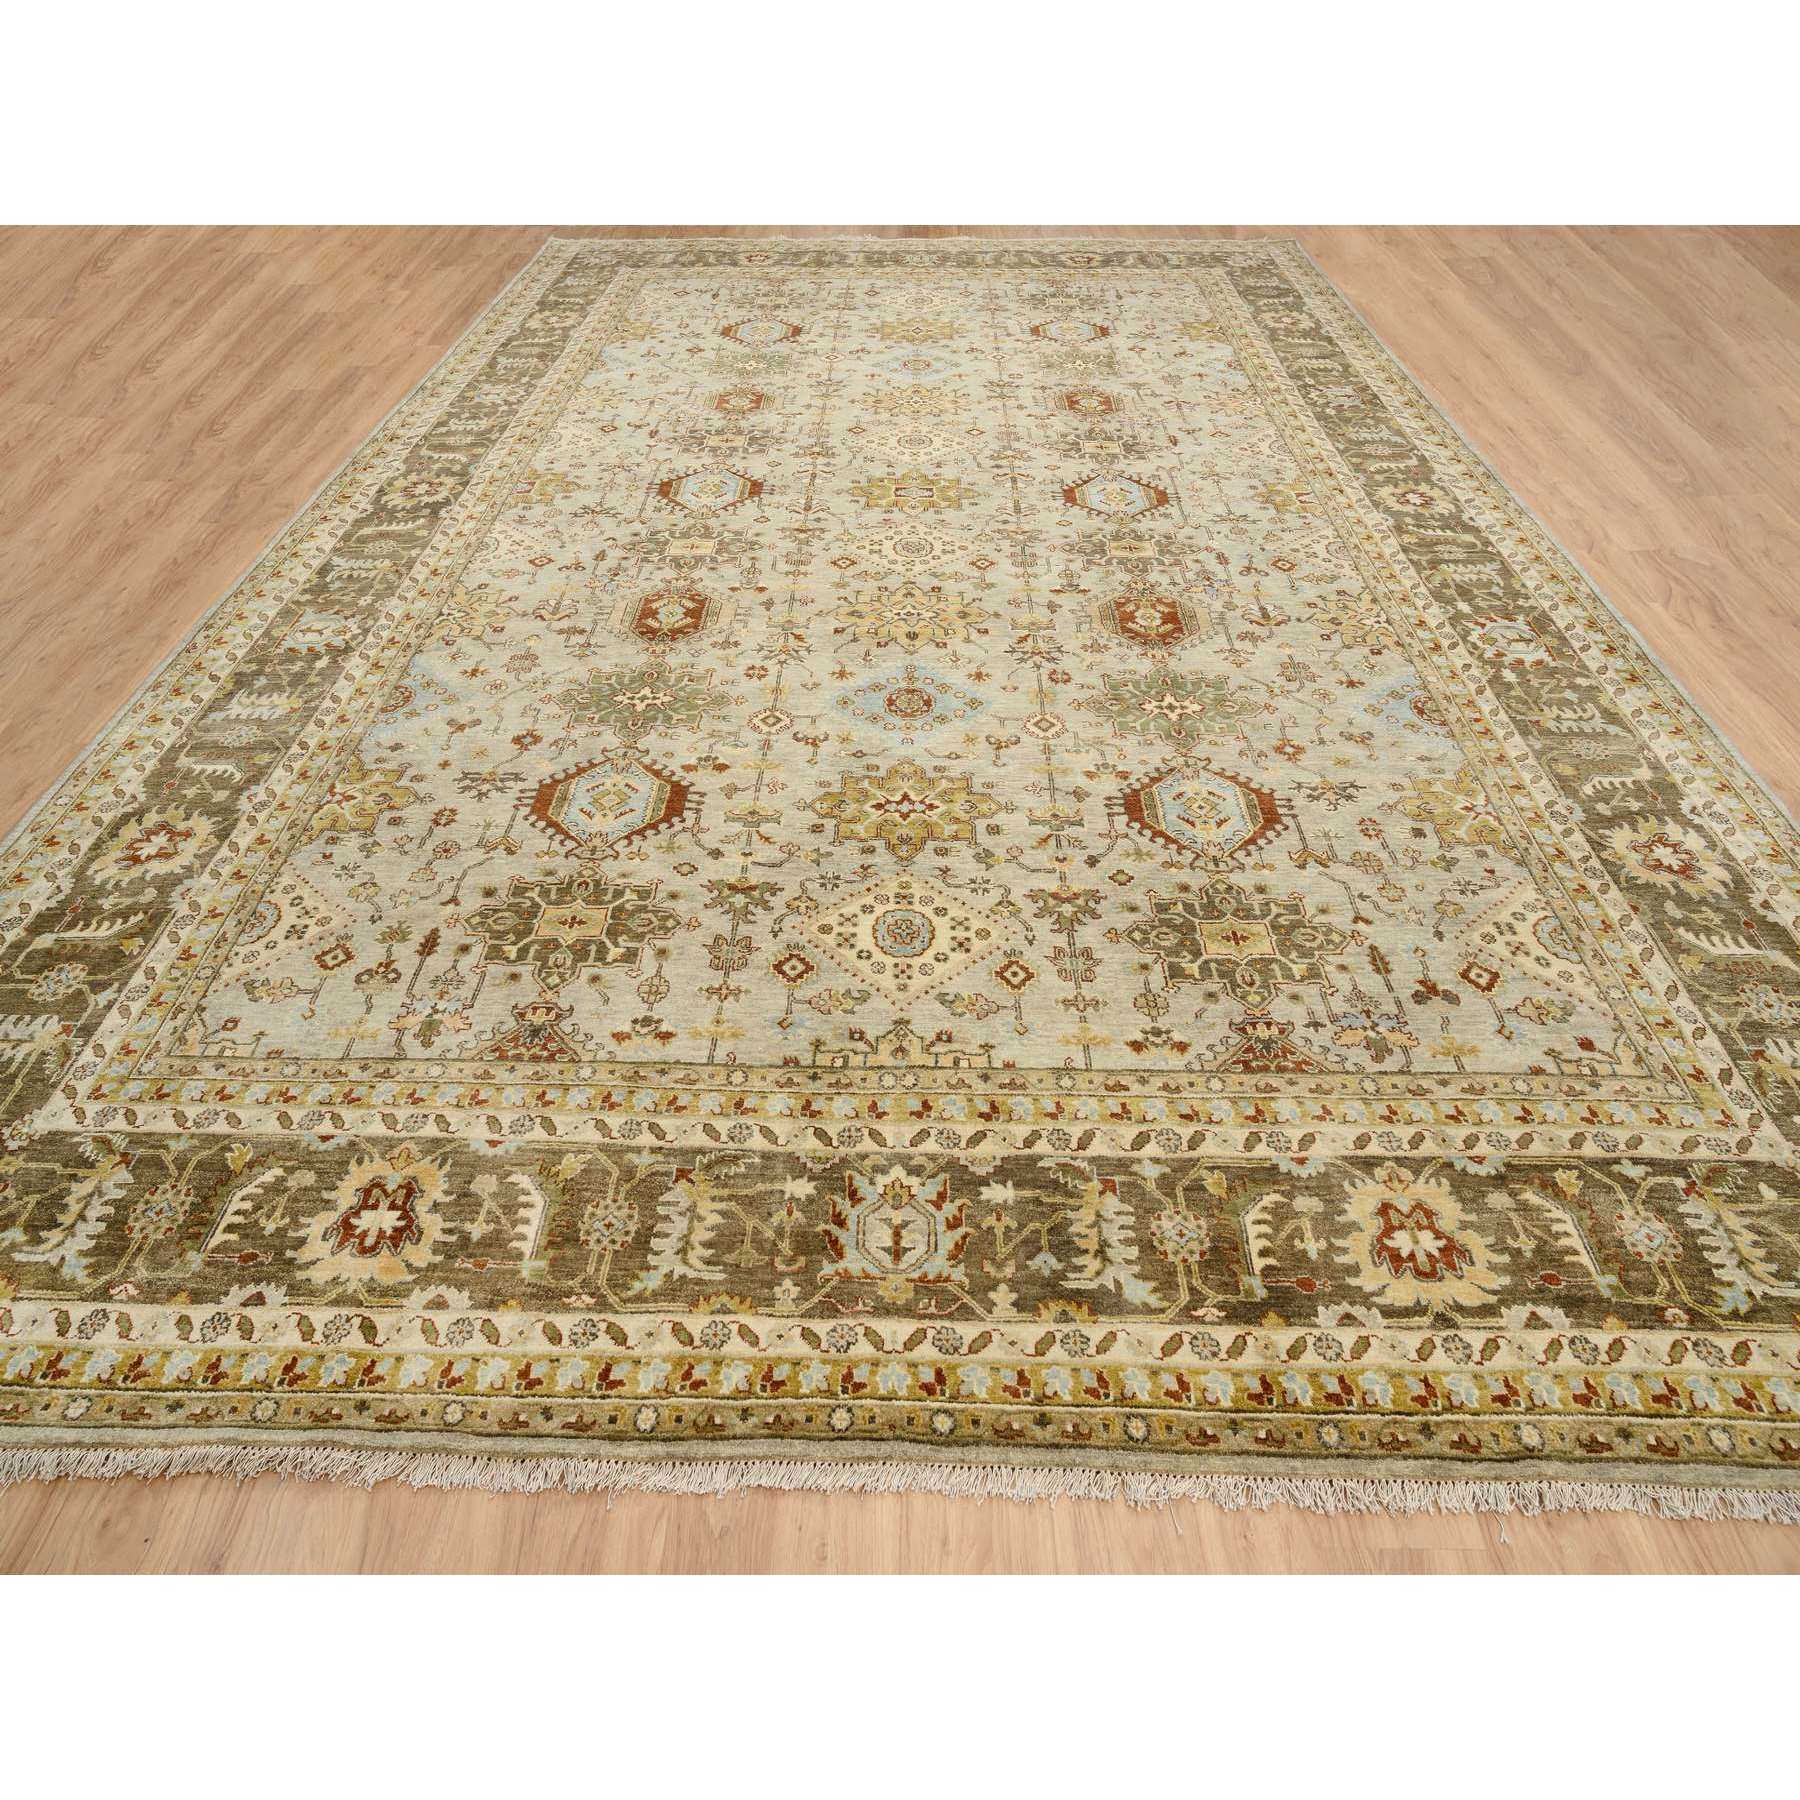 12'x18' Gray-Brown Hand Woven Karajeh Design with Tribal Medallions, Pure Wool Oriental Oversize Rug 